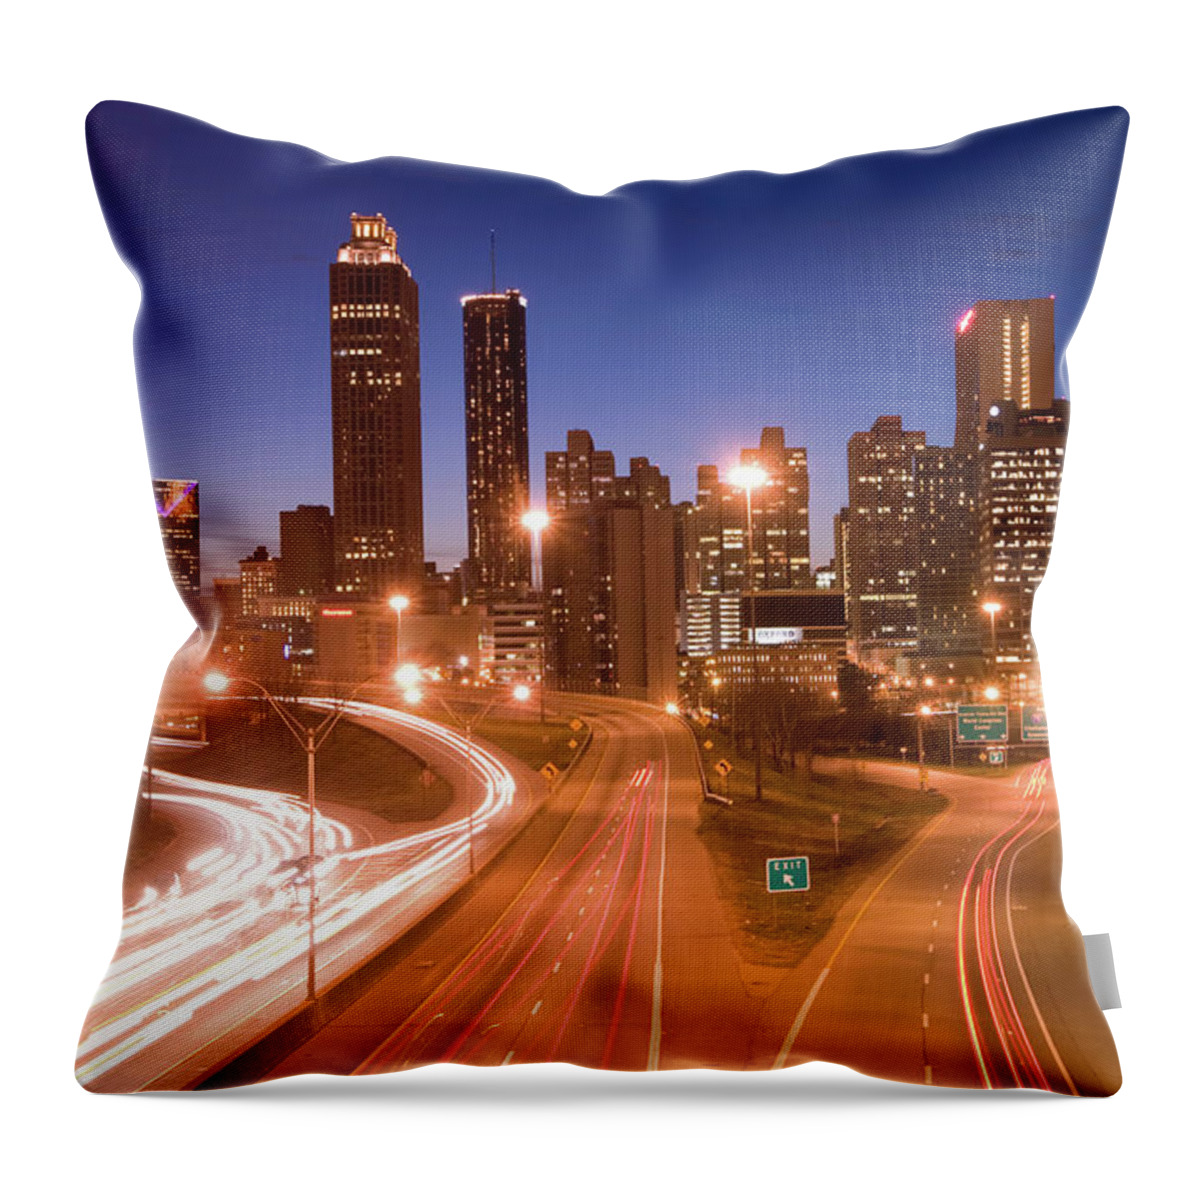 Atlanta Throw Pillow featuring the photograph Atlanta Skyline With Freedom Parkway In by Uyen Le